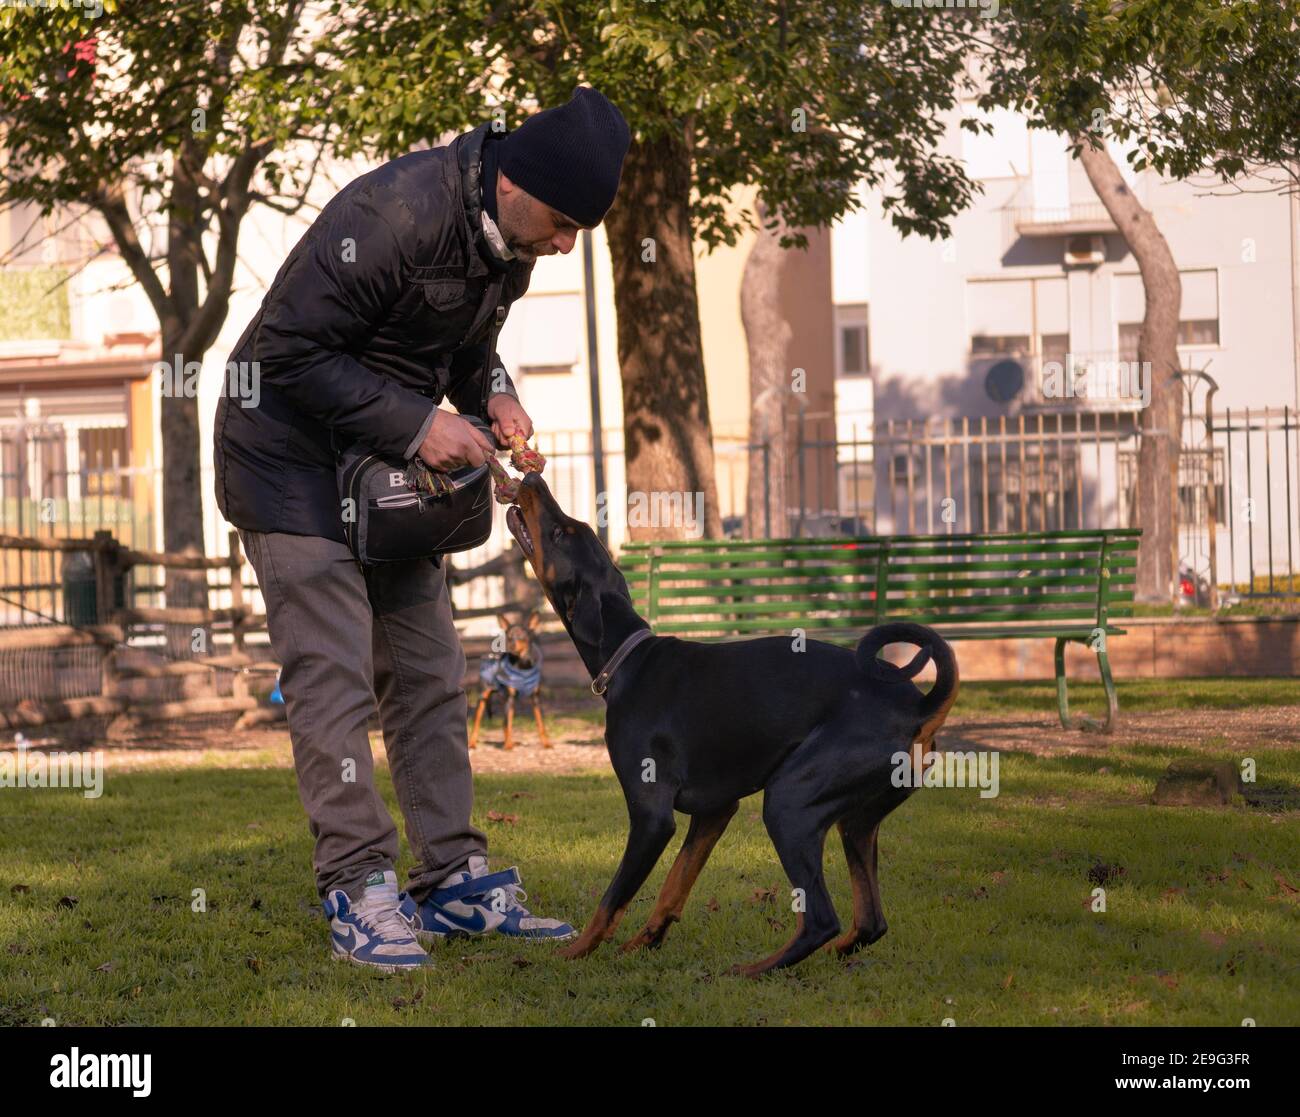 SANTA MARIA CAPUA VETERE, ITALY - Feb 03, 2021: Caserta, Italy, February 03th 2021, Dog trainer playing with his pet in the park Stock Photo